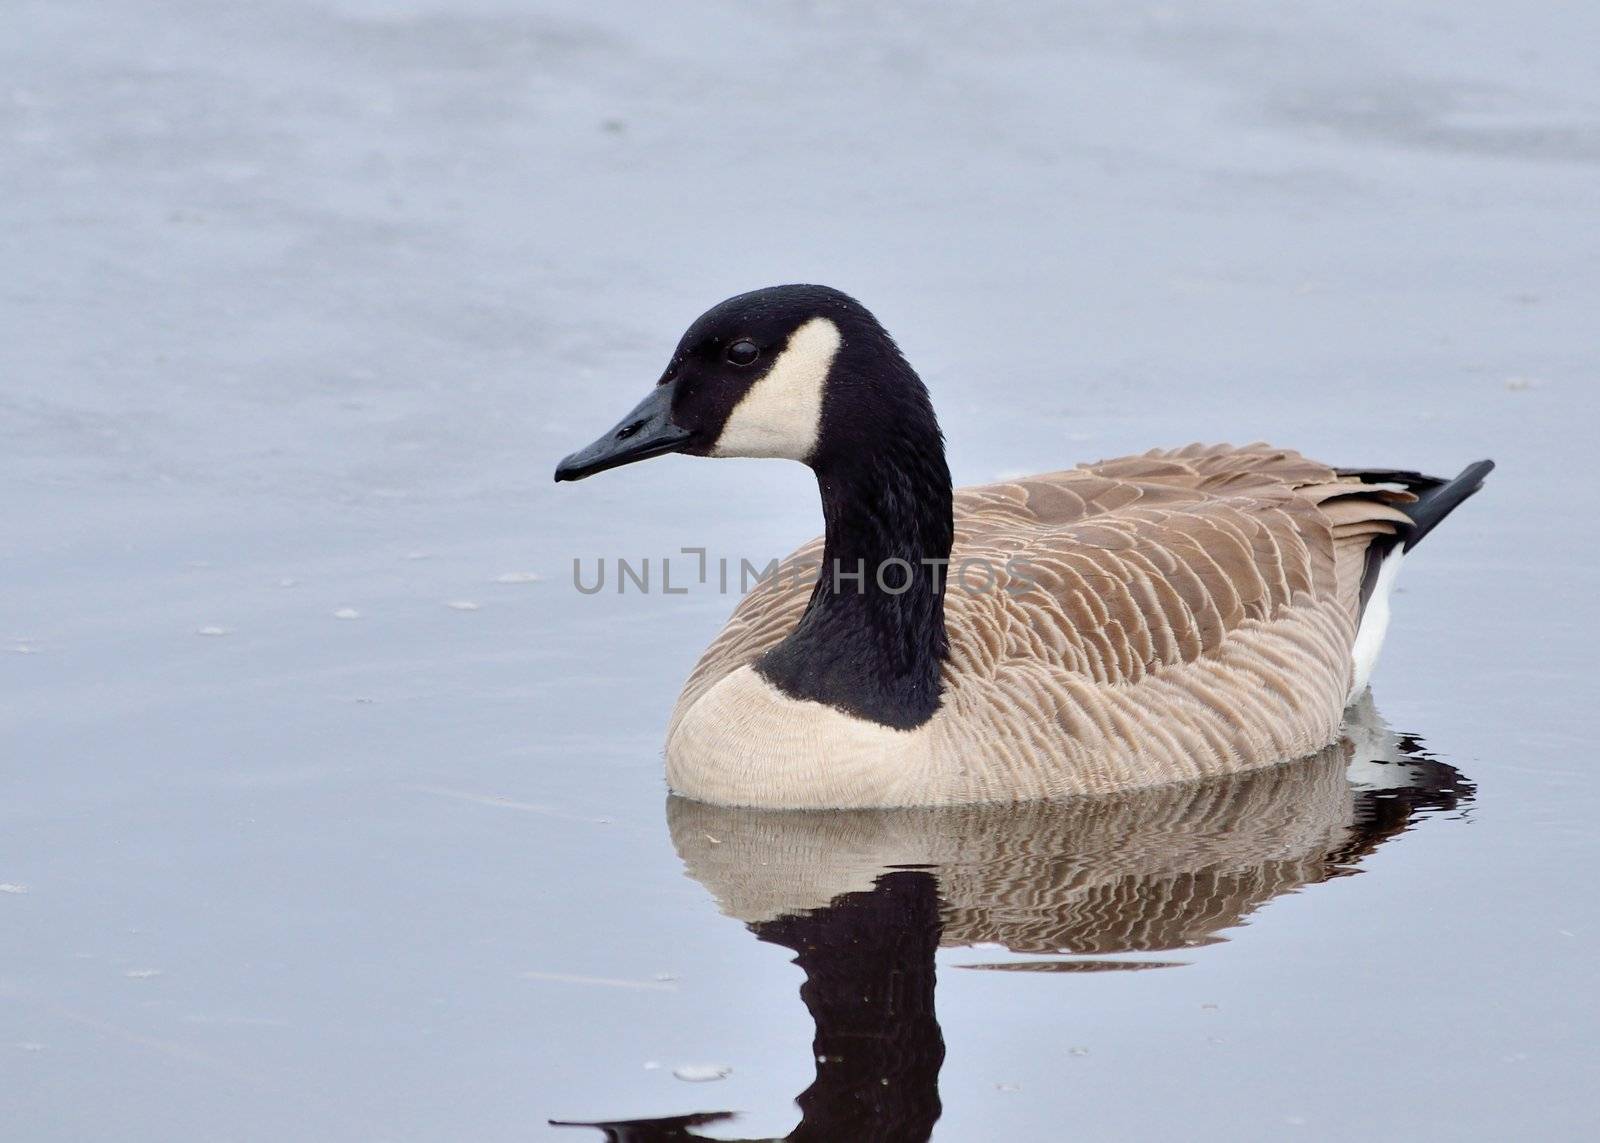 Cackling Goose swimming in a pond in winter.